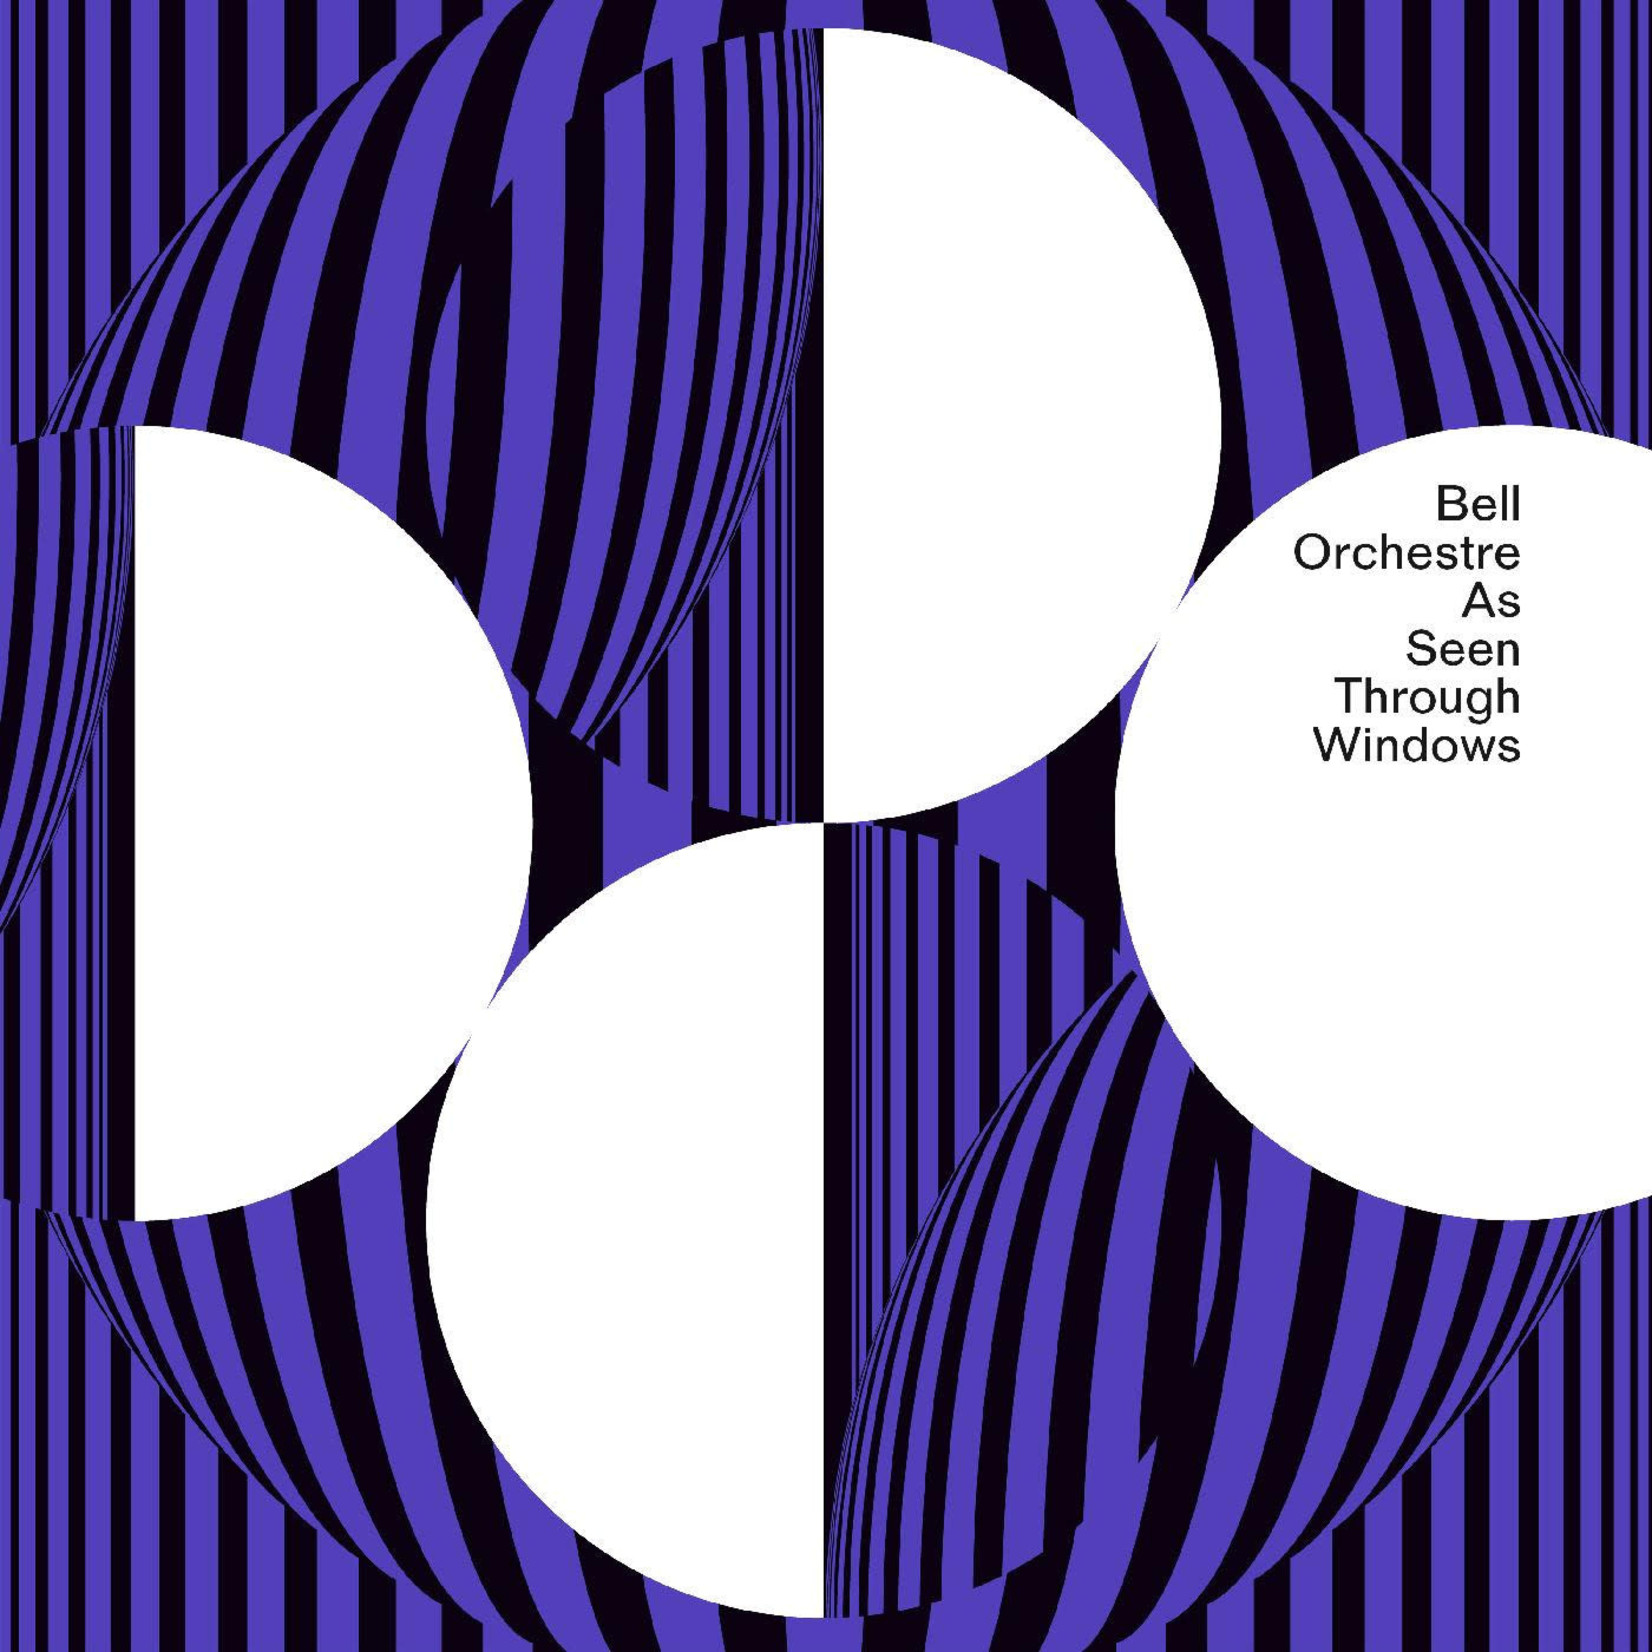 Erased Tapes Bell Orchestre - As Seen Through Windows (LP)